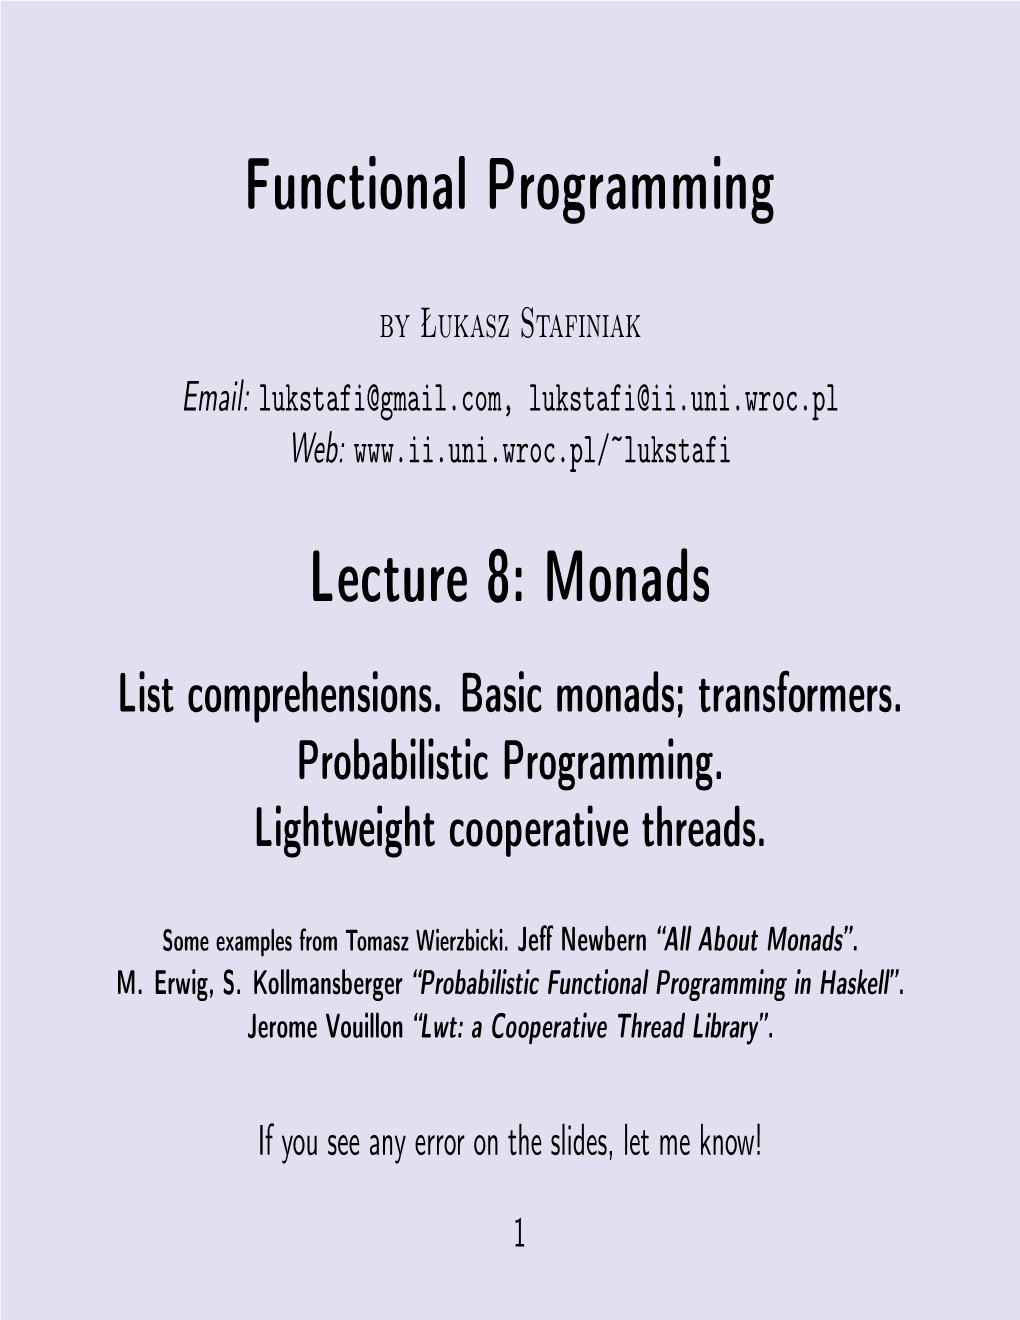 Functional Programming Lecture 8: Monads